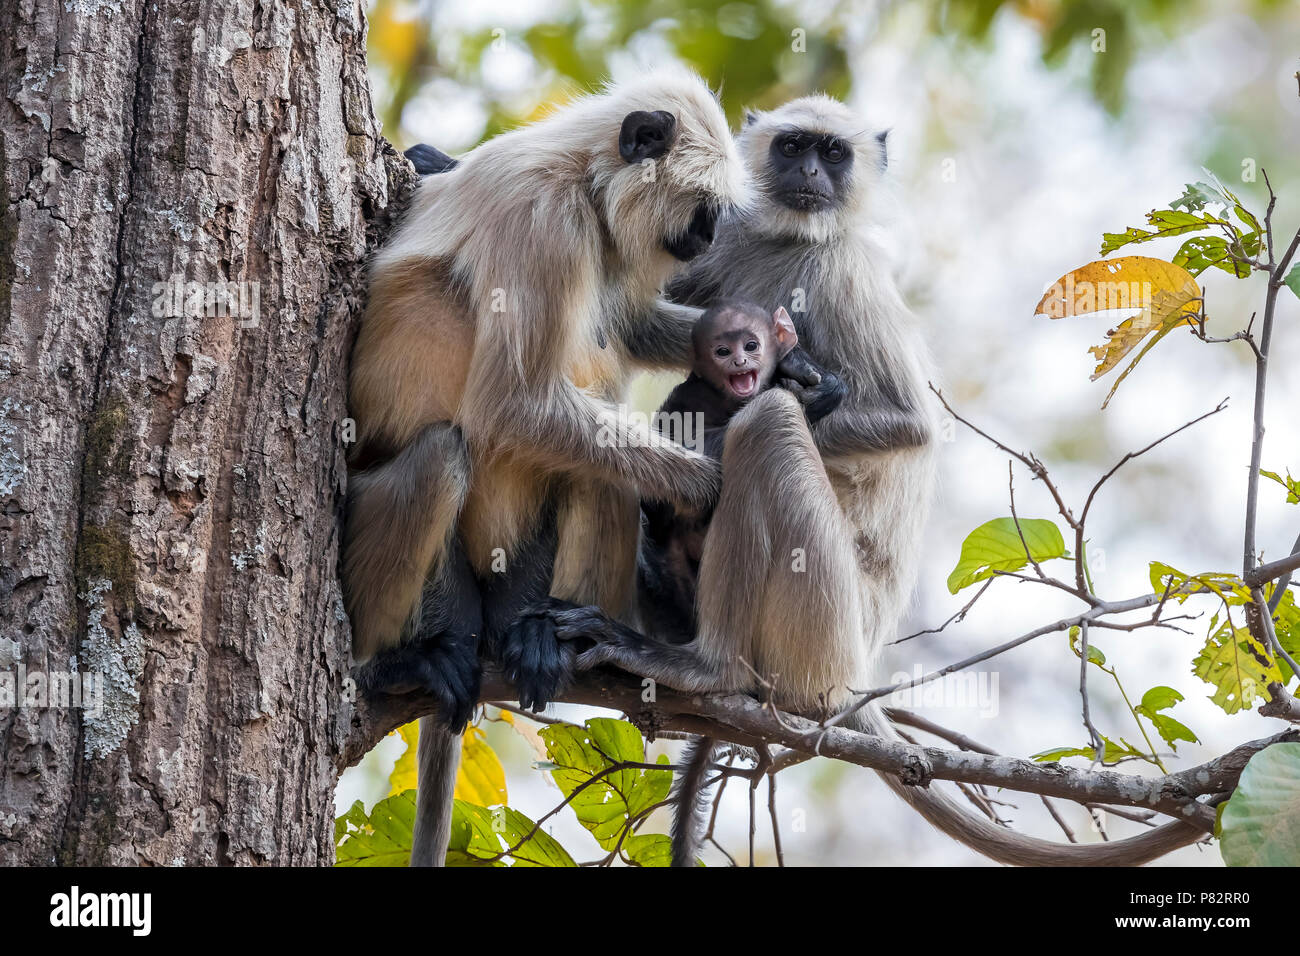 Adult Northern Plains Langurs sitting on a tree and protecting cub in Bandavgarh NP, India. March 2017. Stock Photo